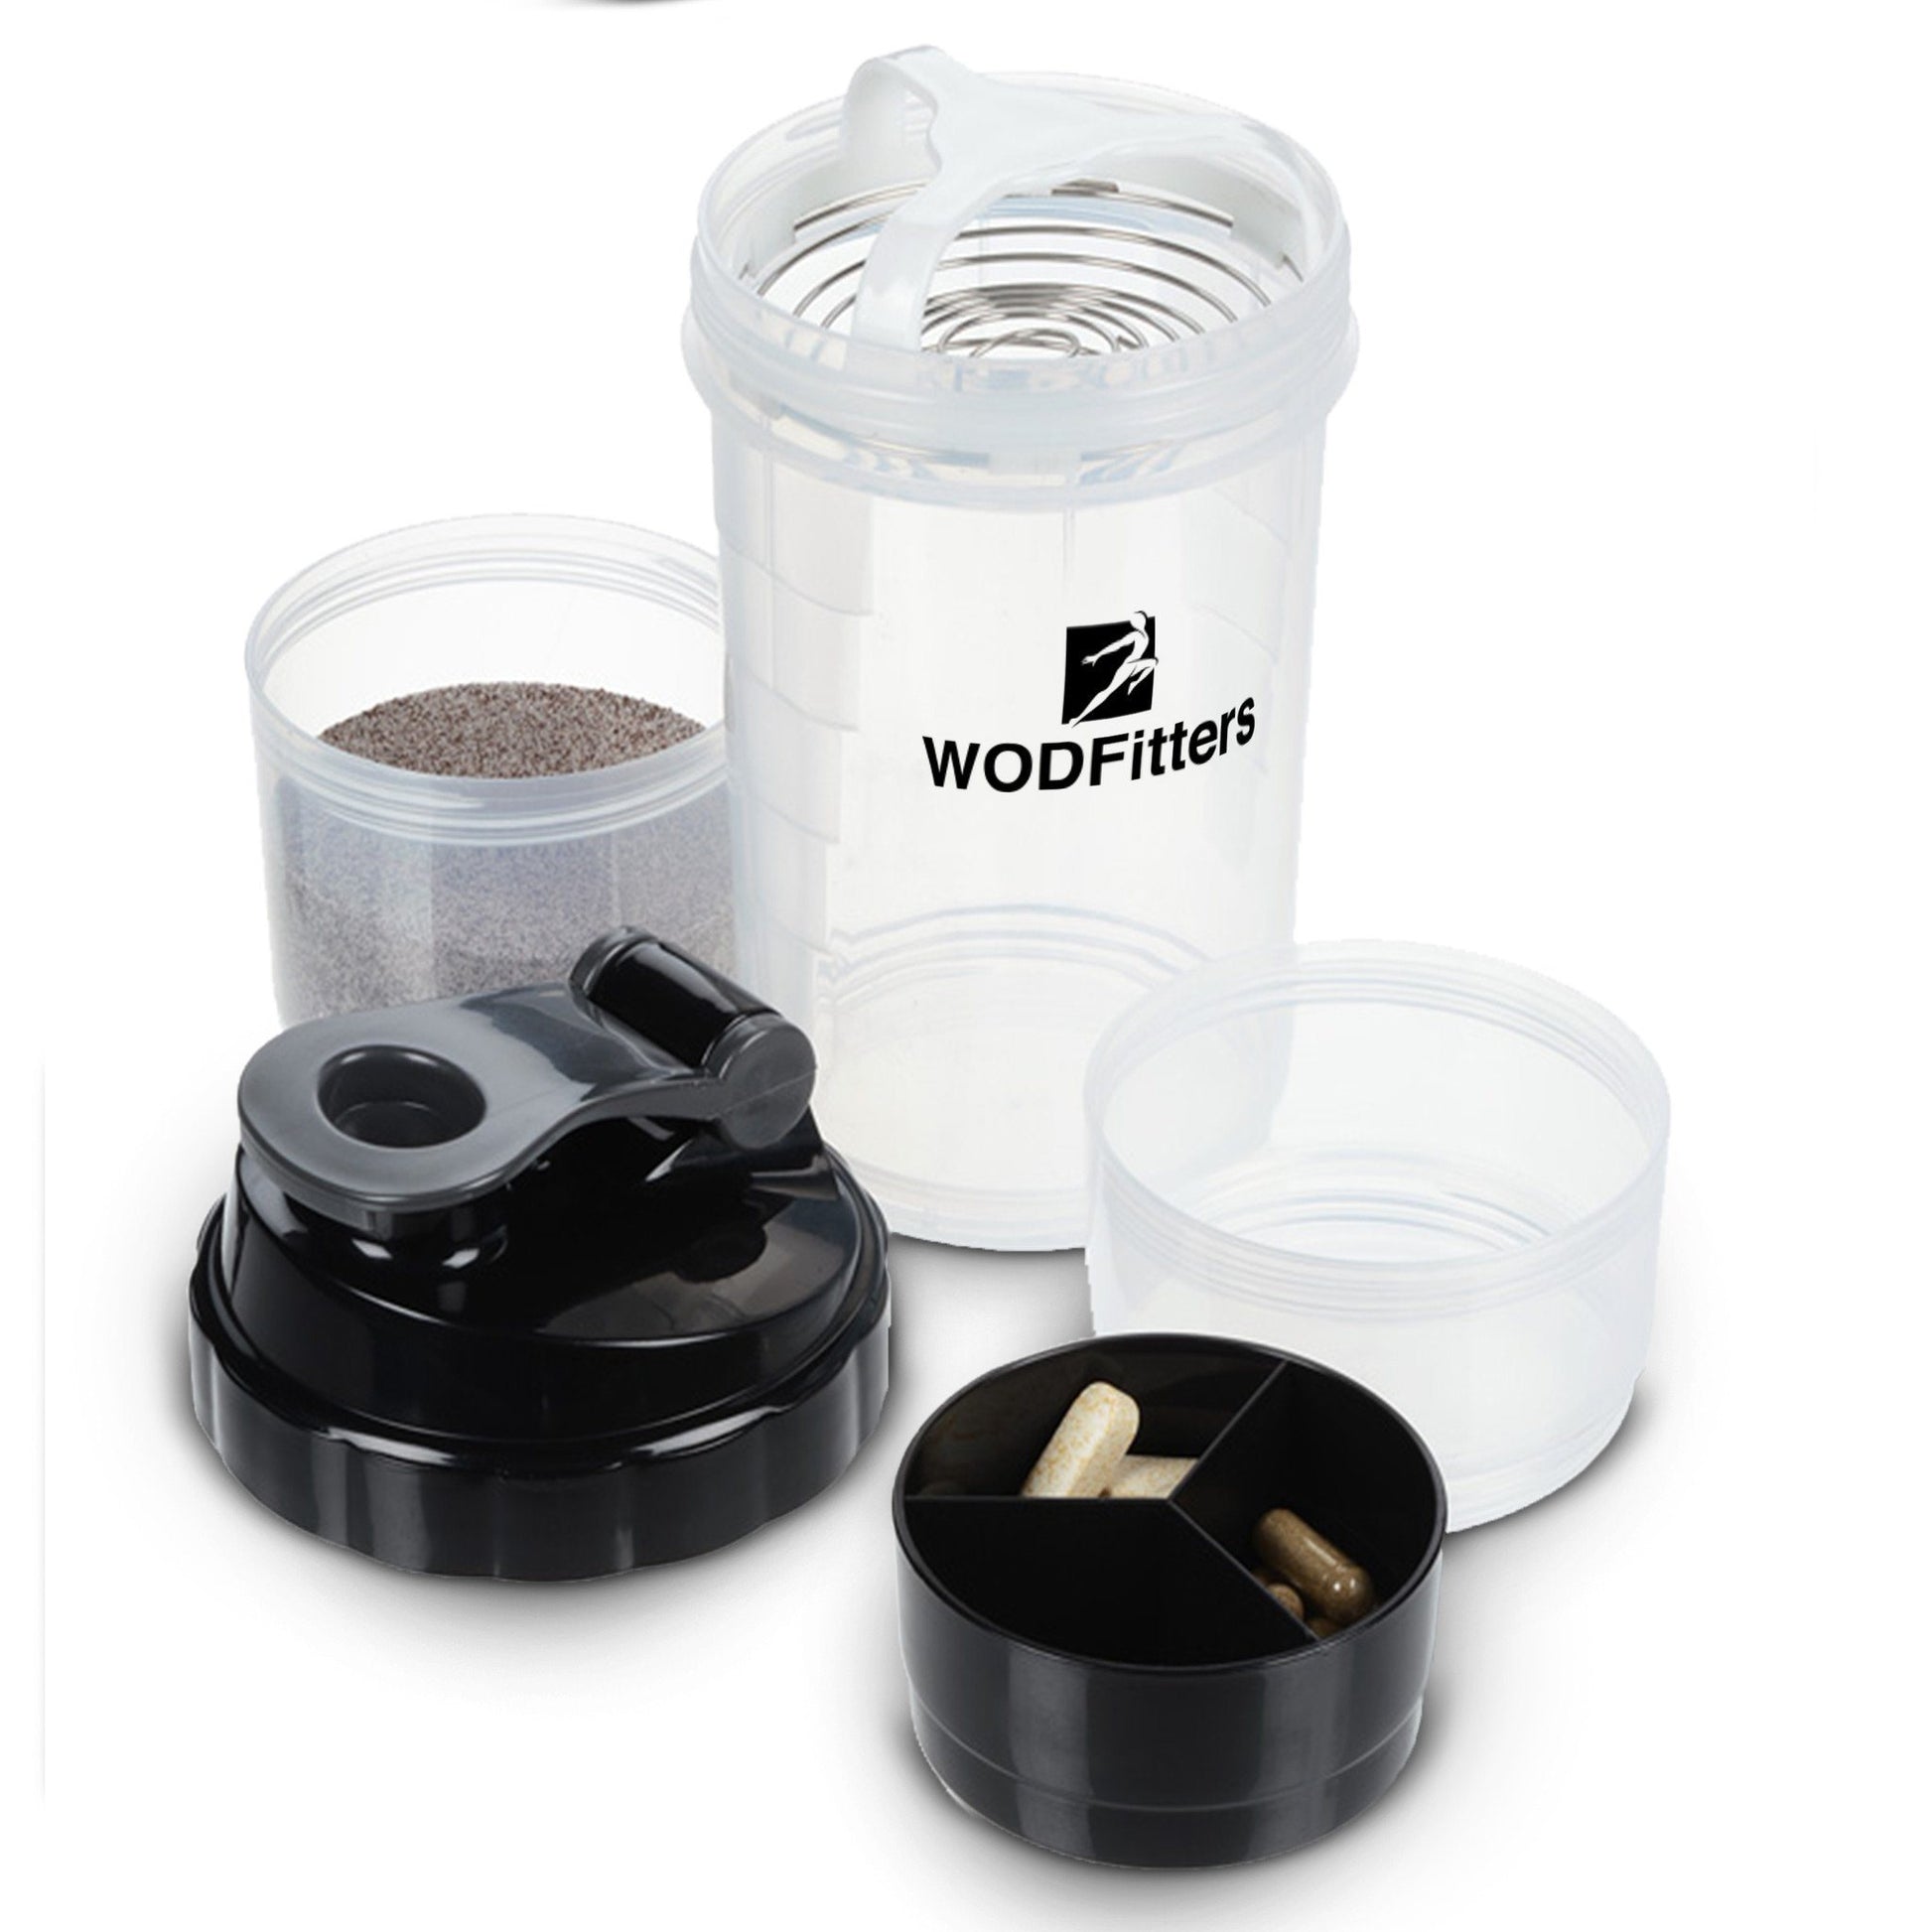 WODFitters 3 in 1 Protein Blender Super Sports Cup 